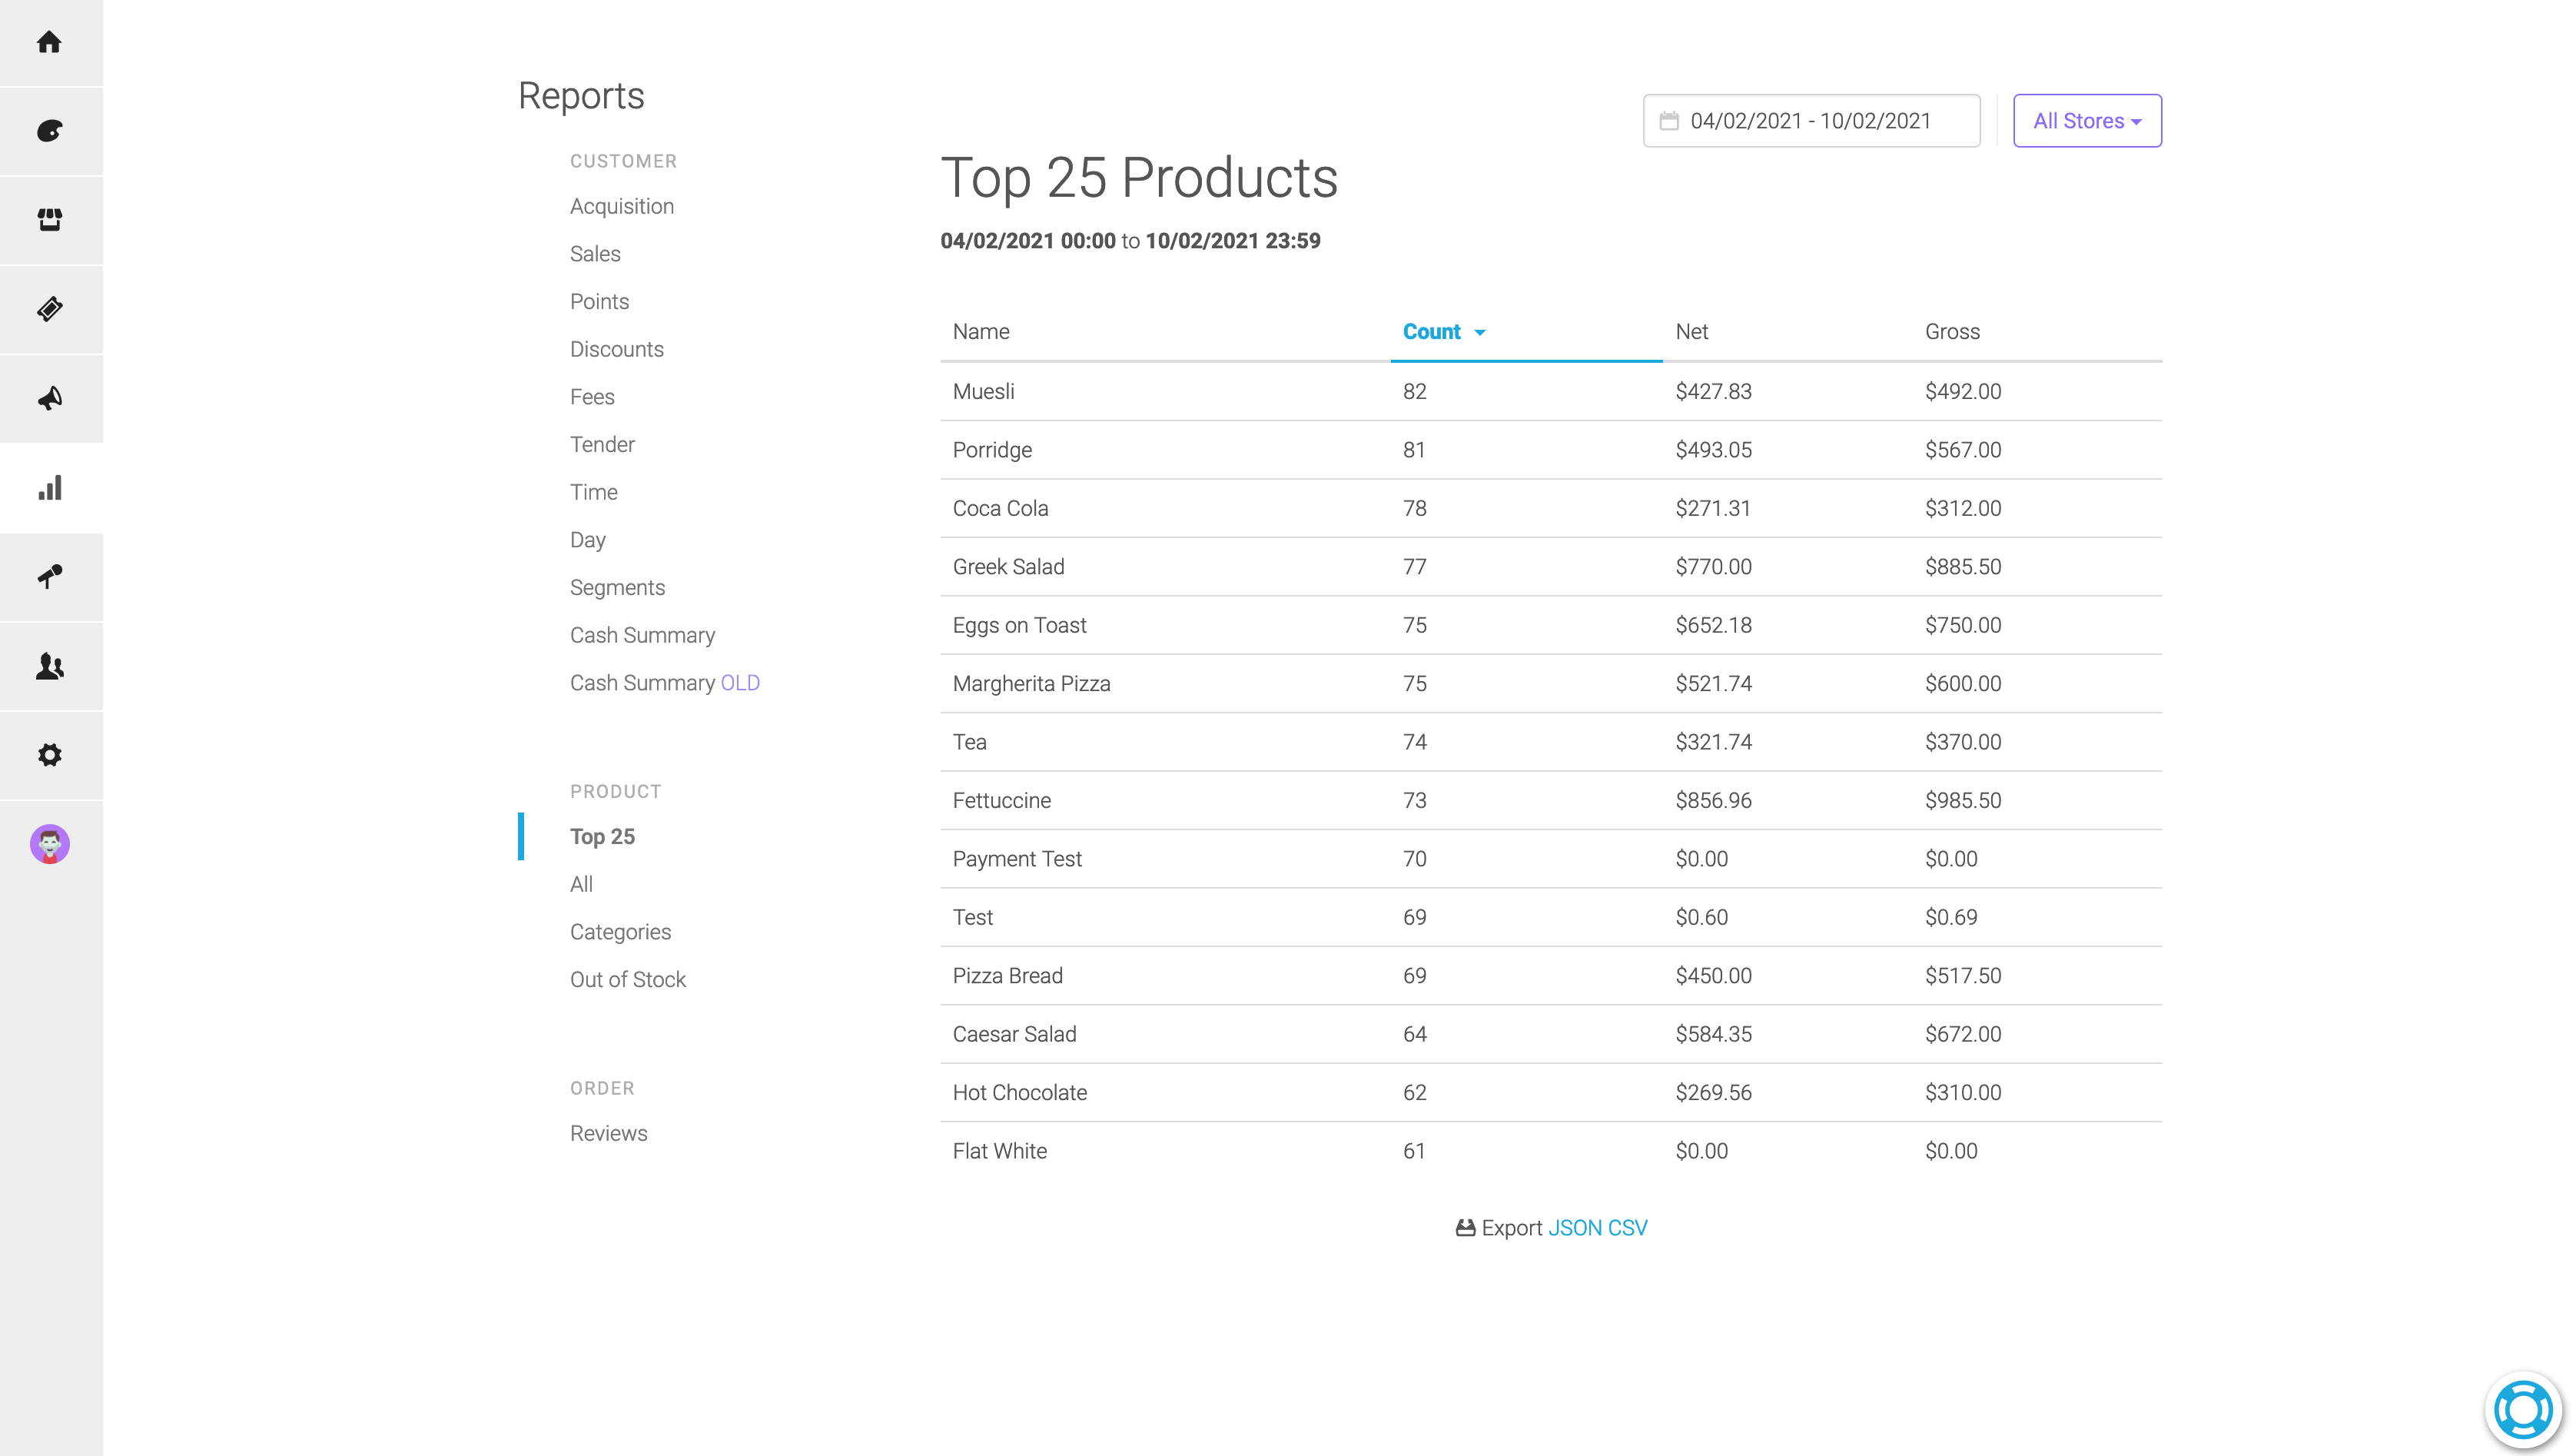 Top Products Report